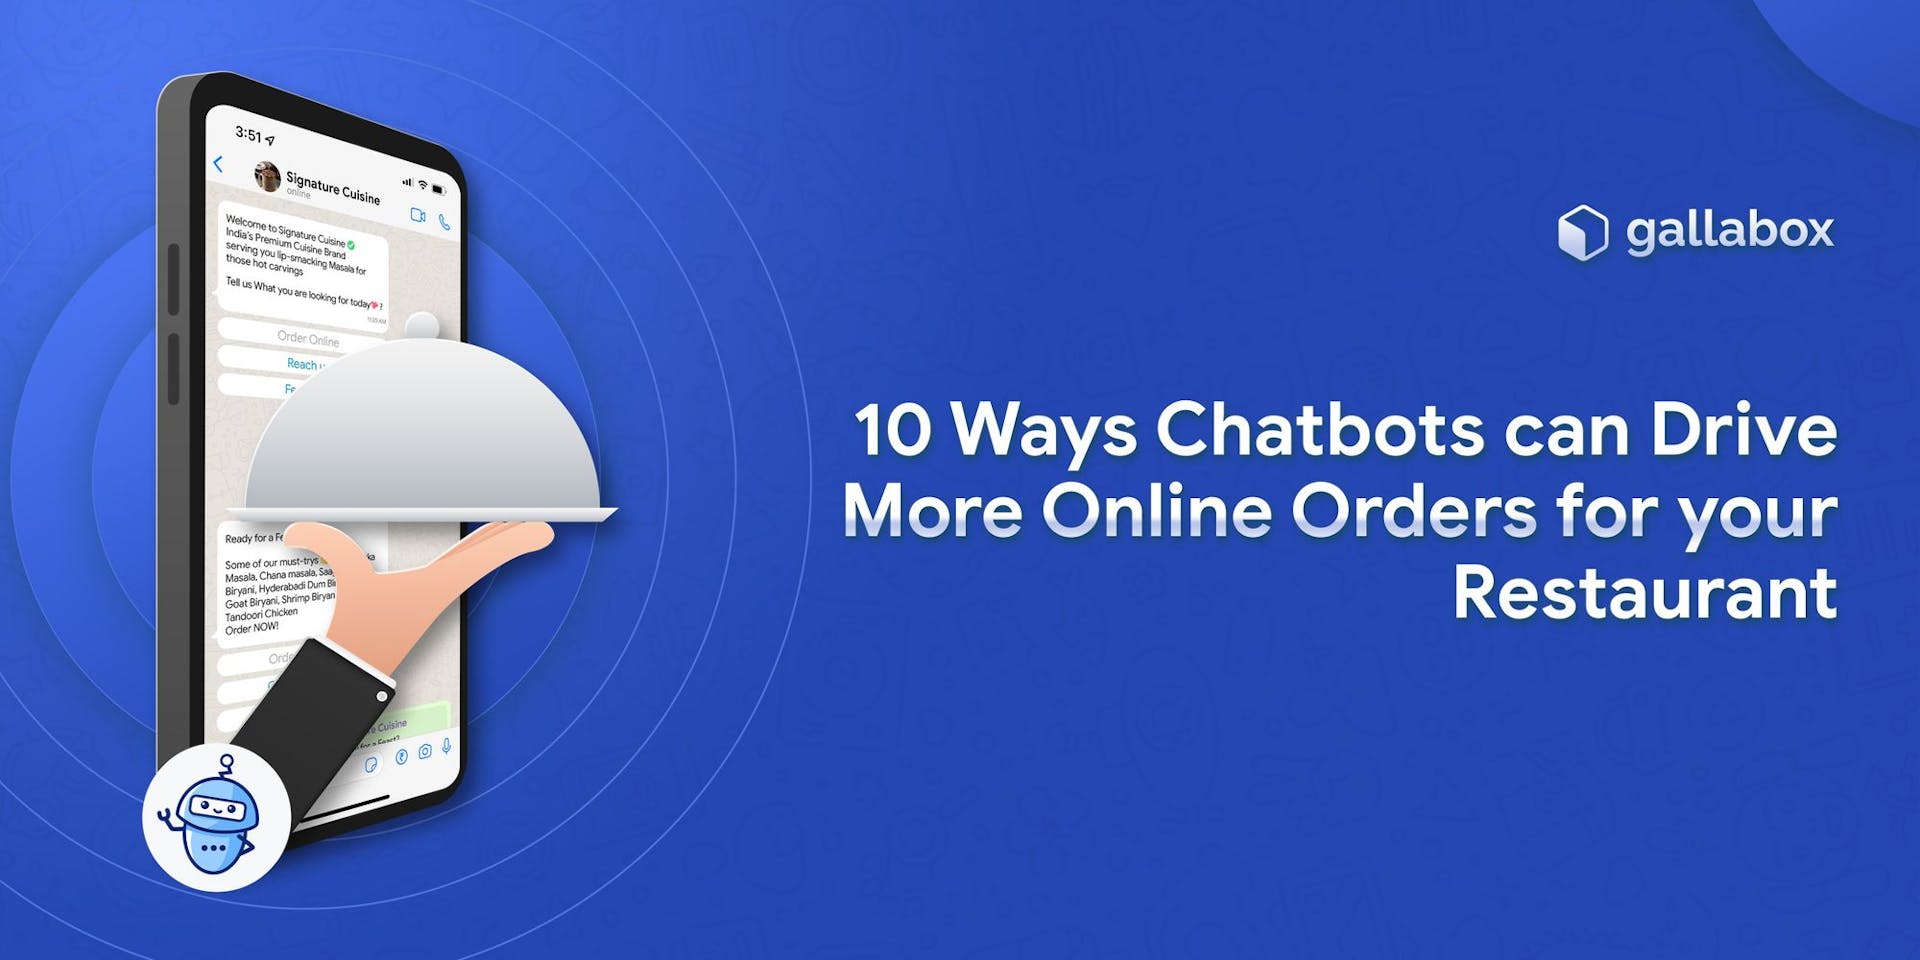 Restaurant chatbots: How they can drive online orders